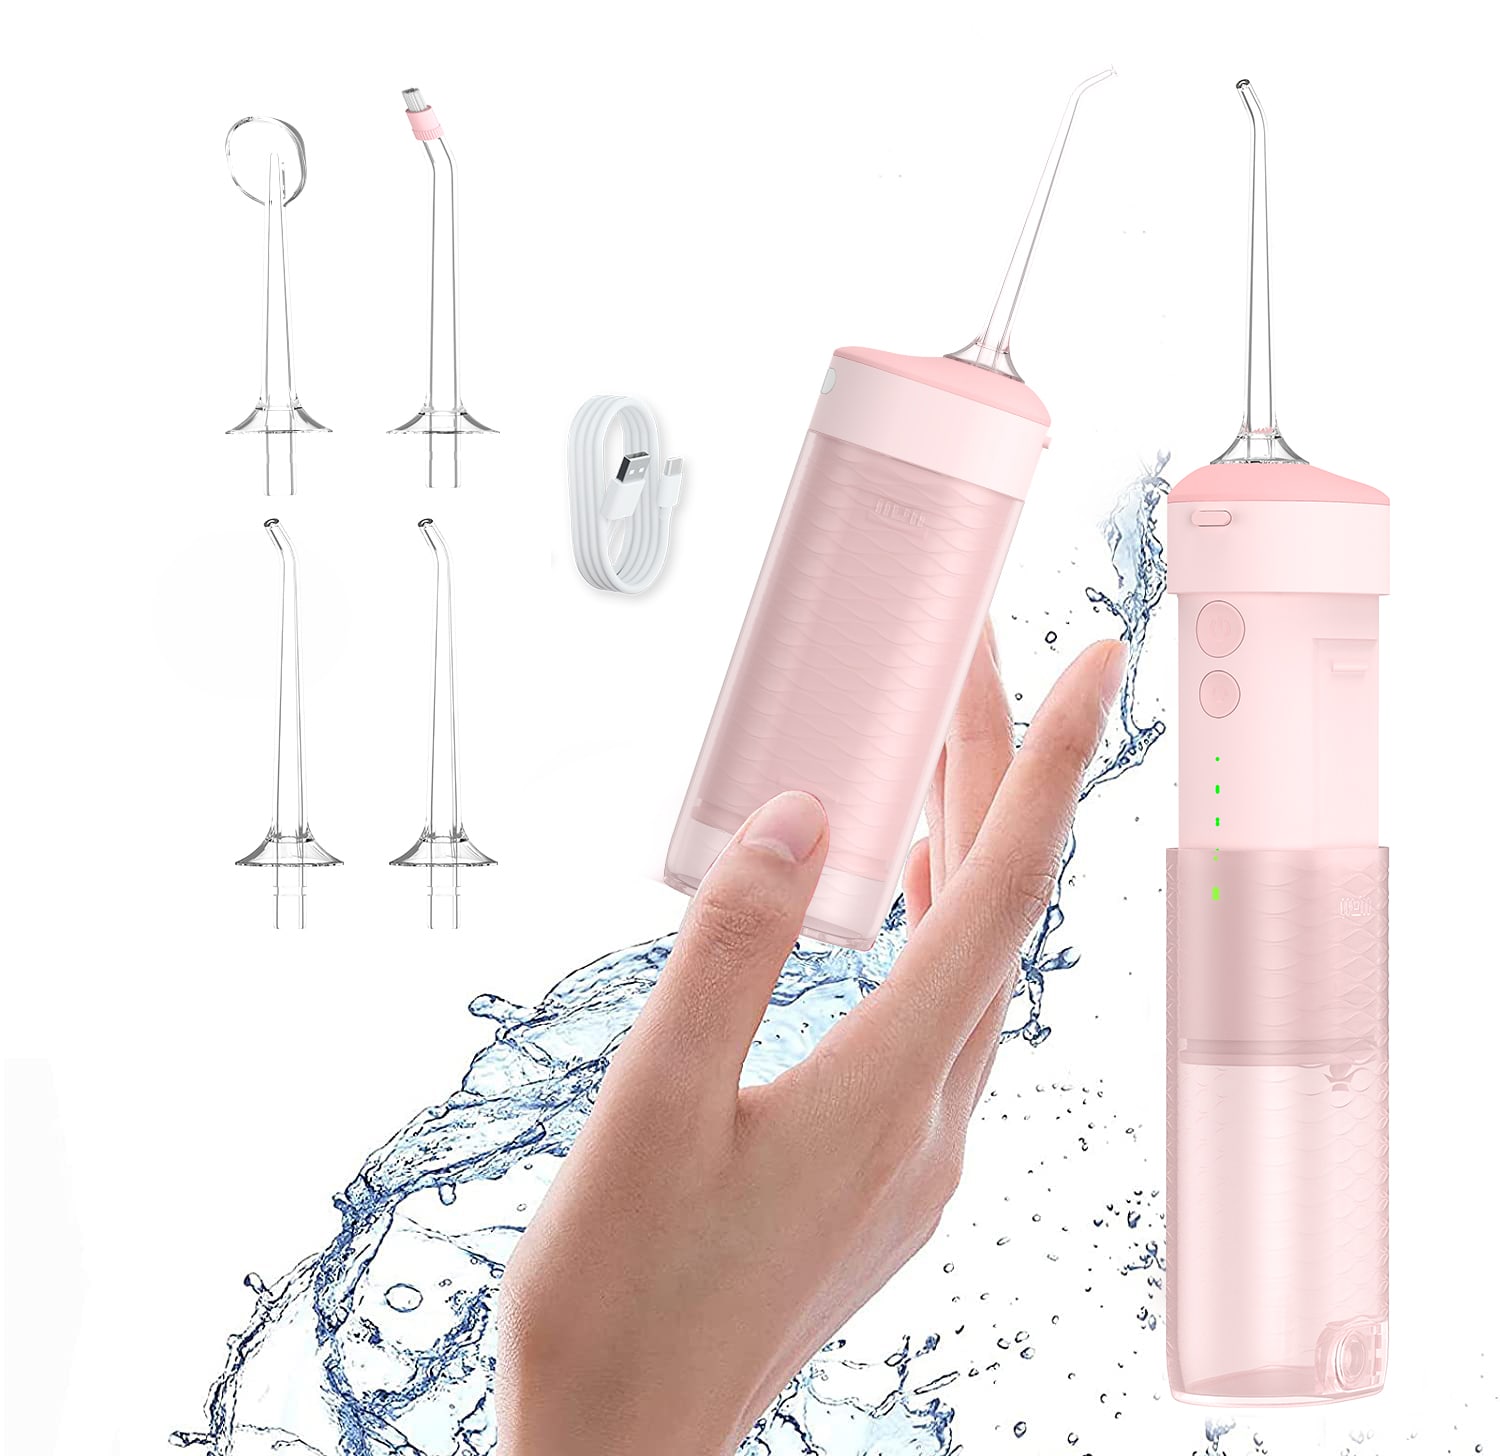 The history of the water flosser